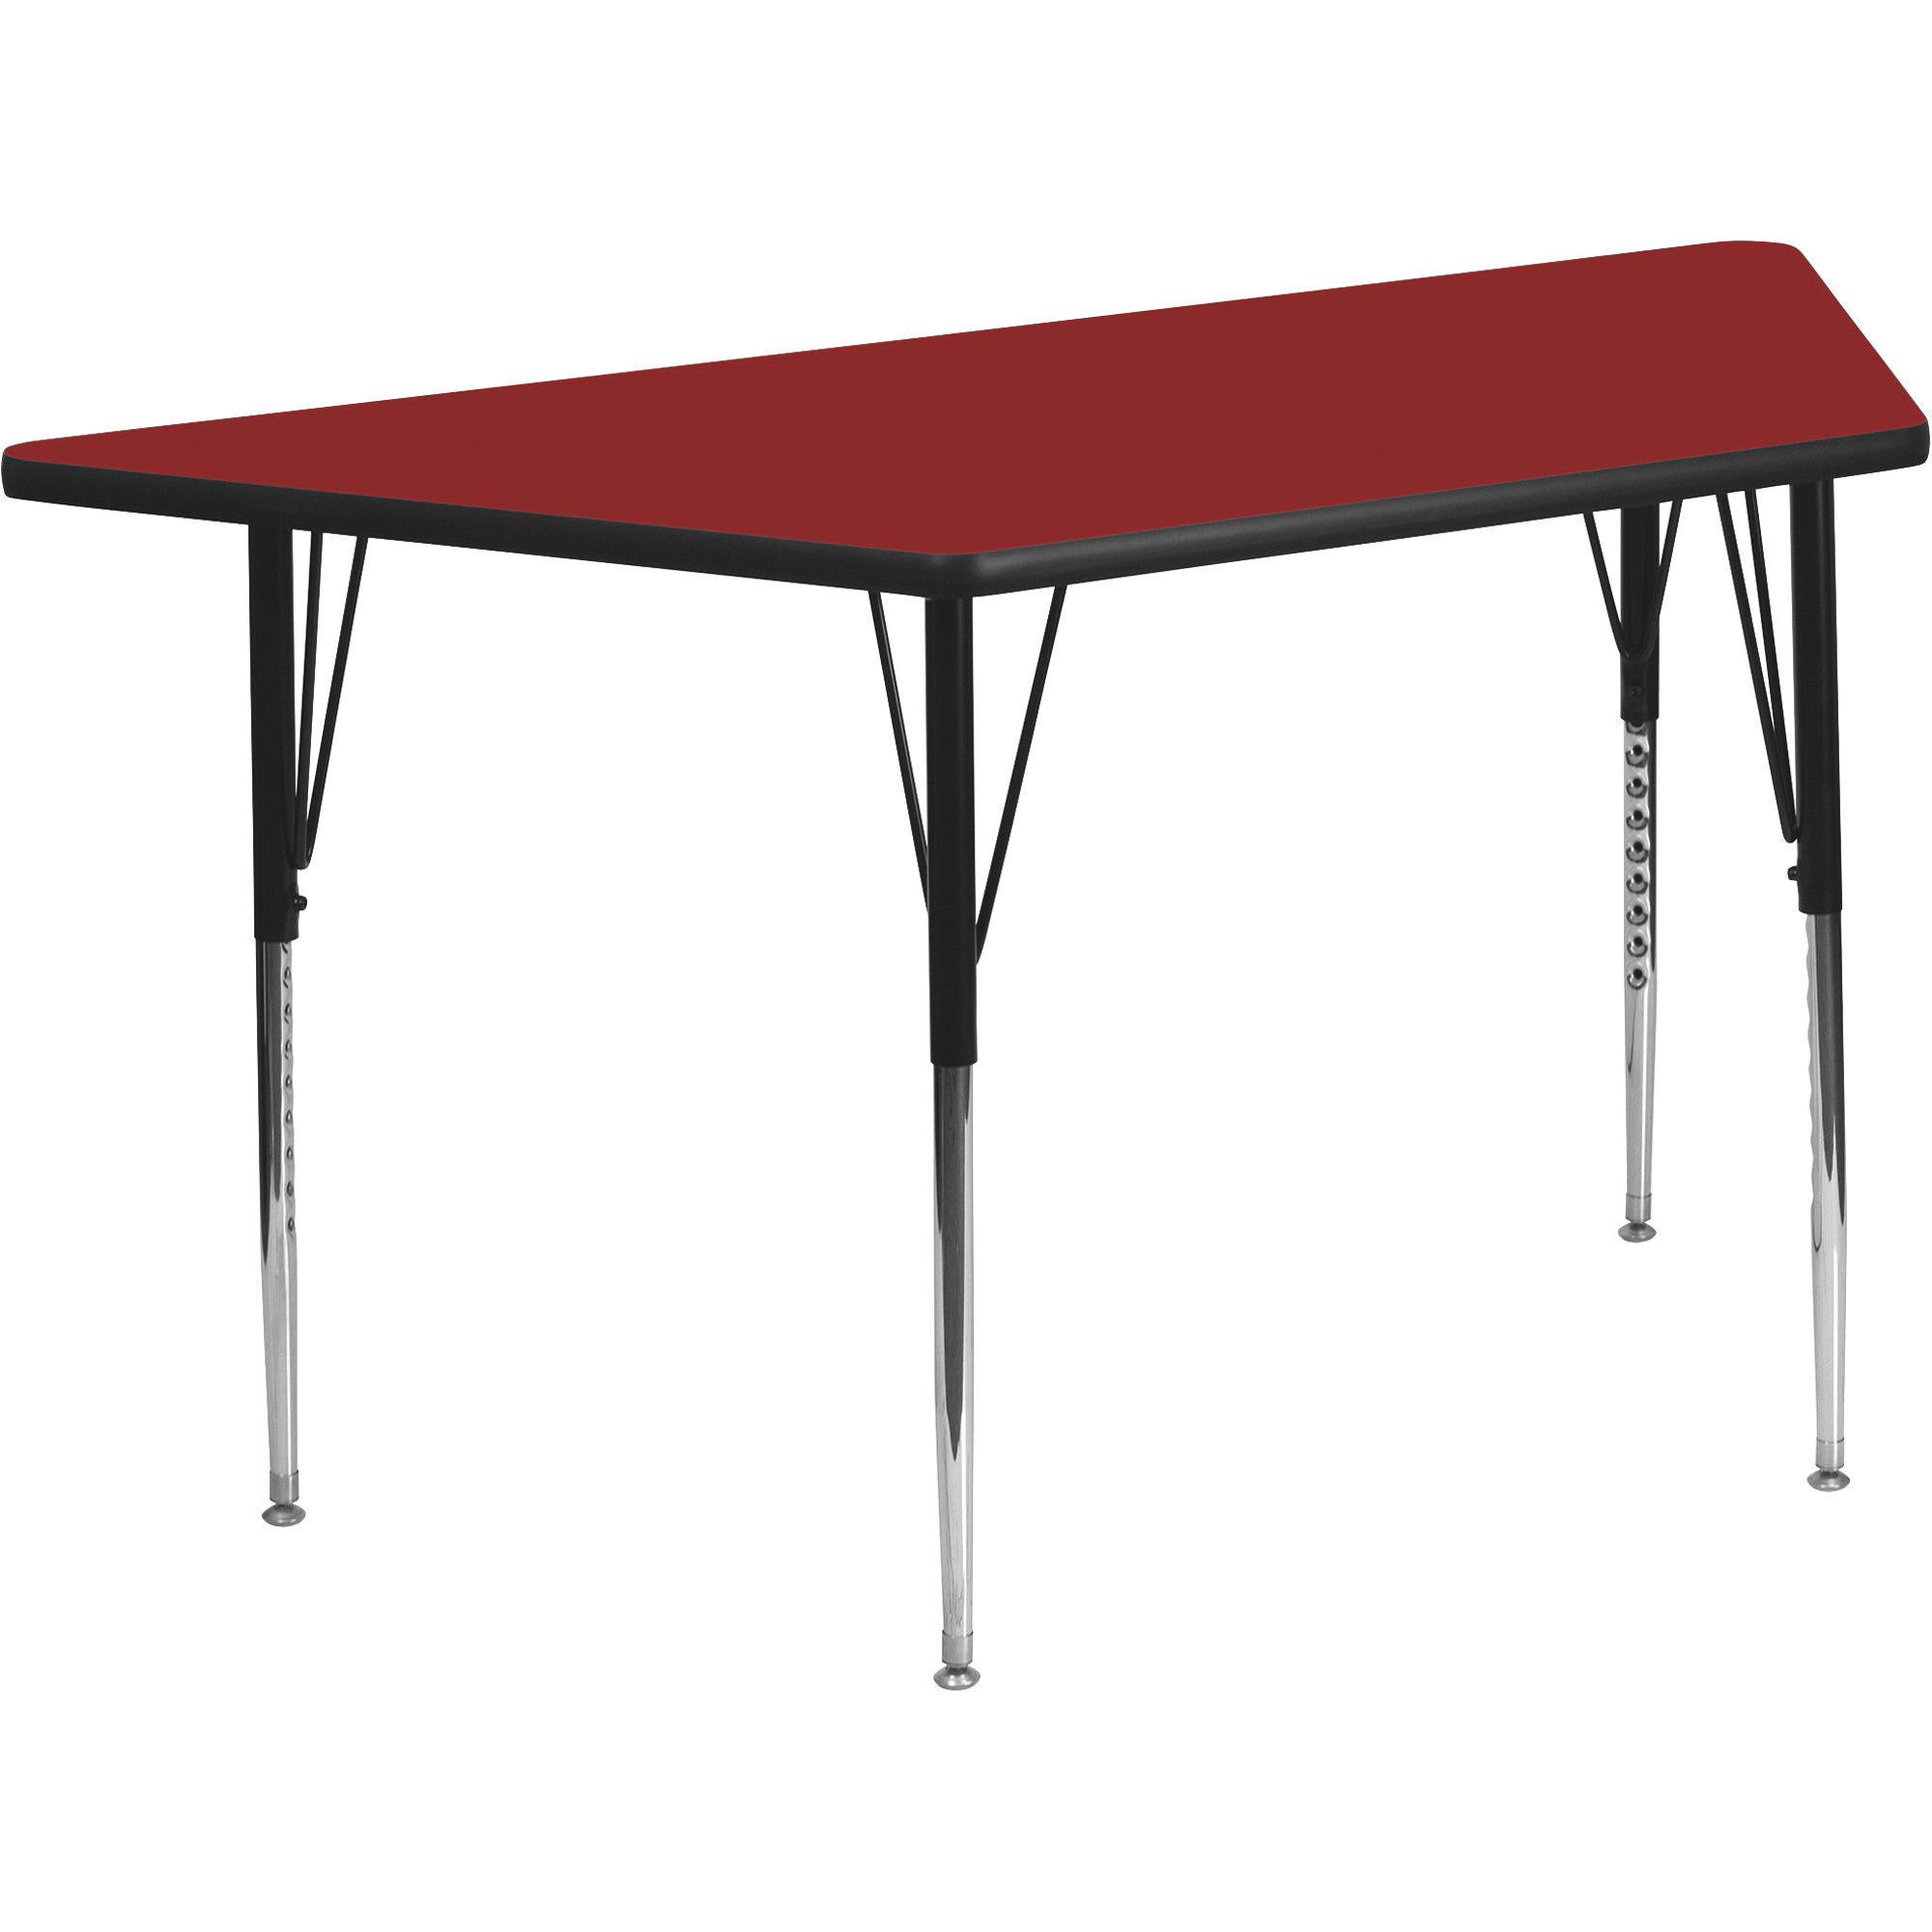 Flash Furniture Adjustable Height Trapezoid Activity Table with Casters â Red, 30Inch L x 57Inch W x 21 1/8â30 1/8Inch H, Model XUA3060TRPREDTA